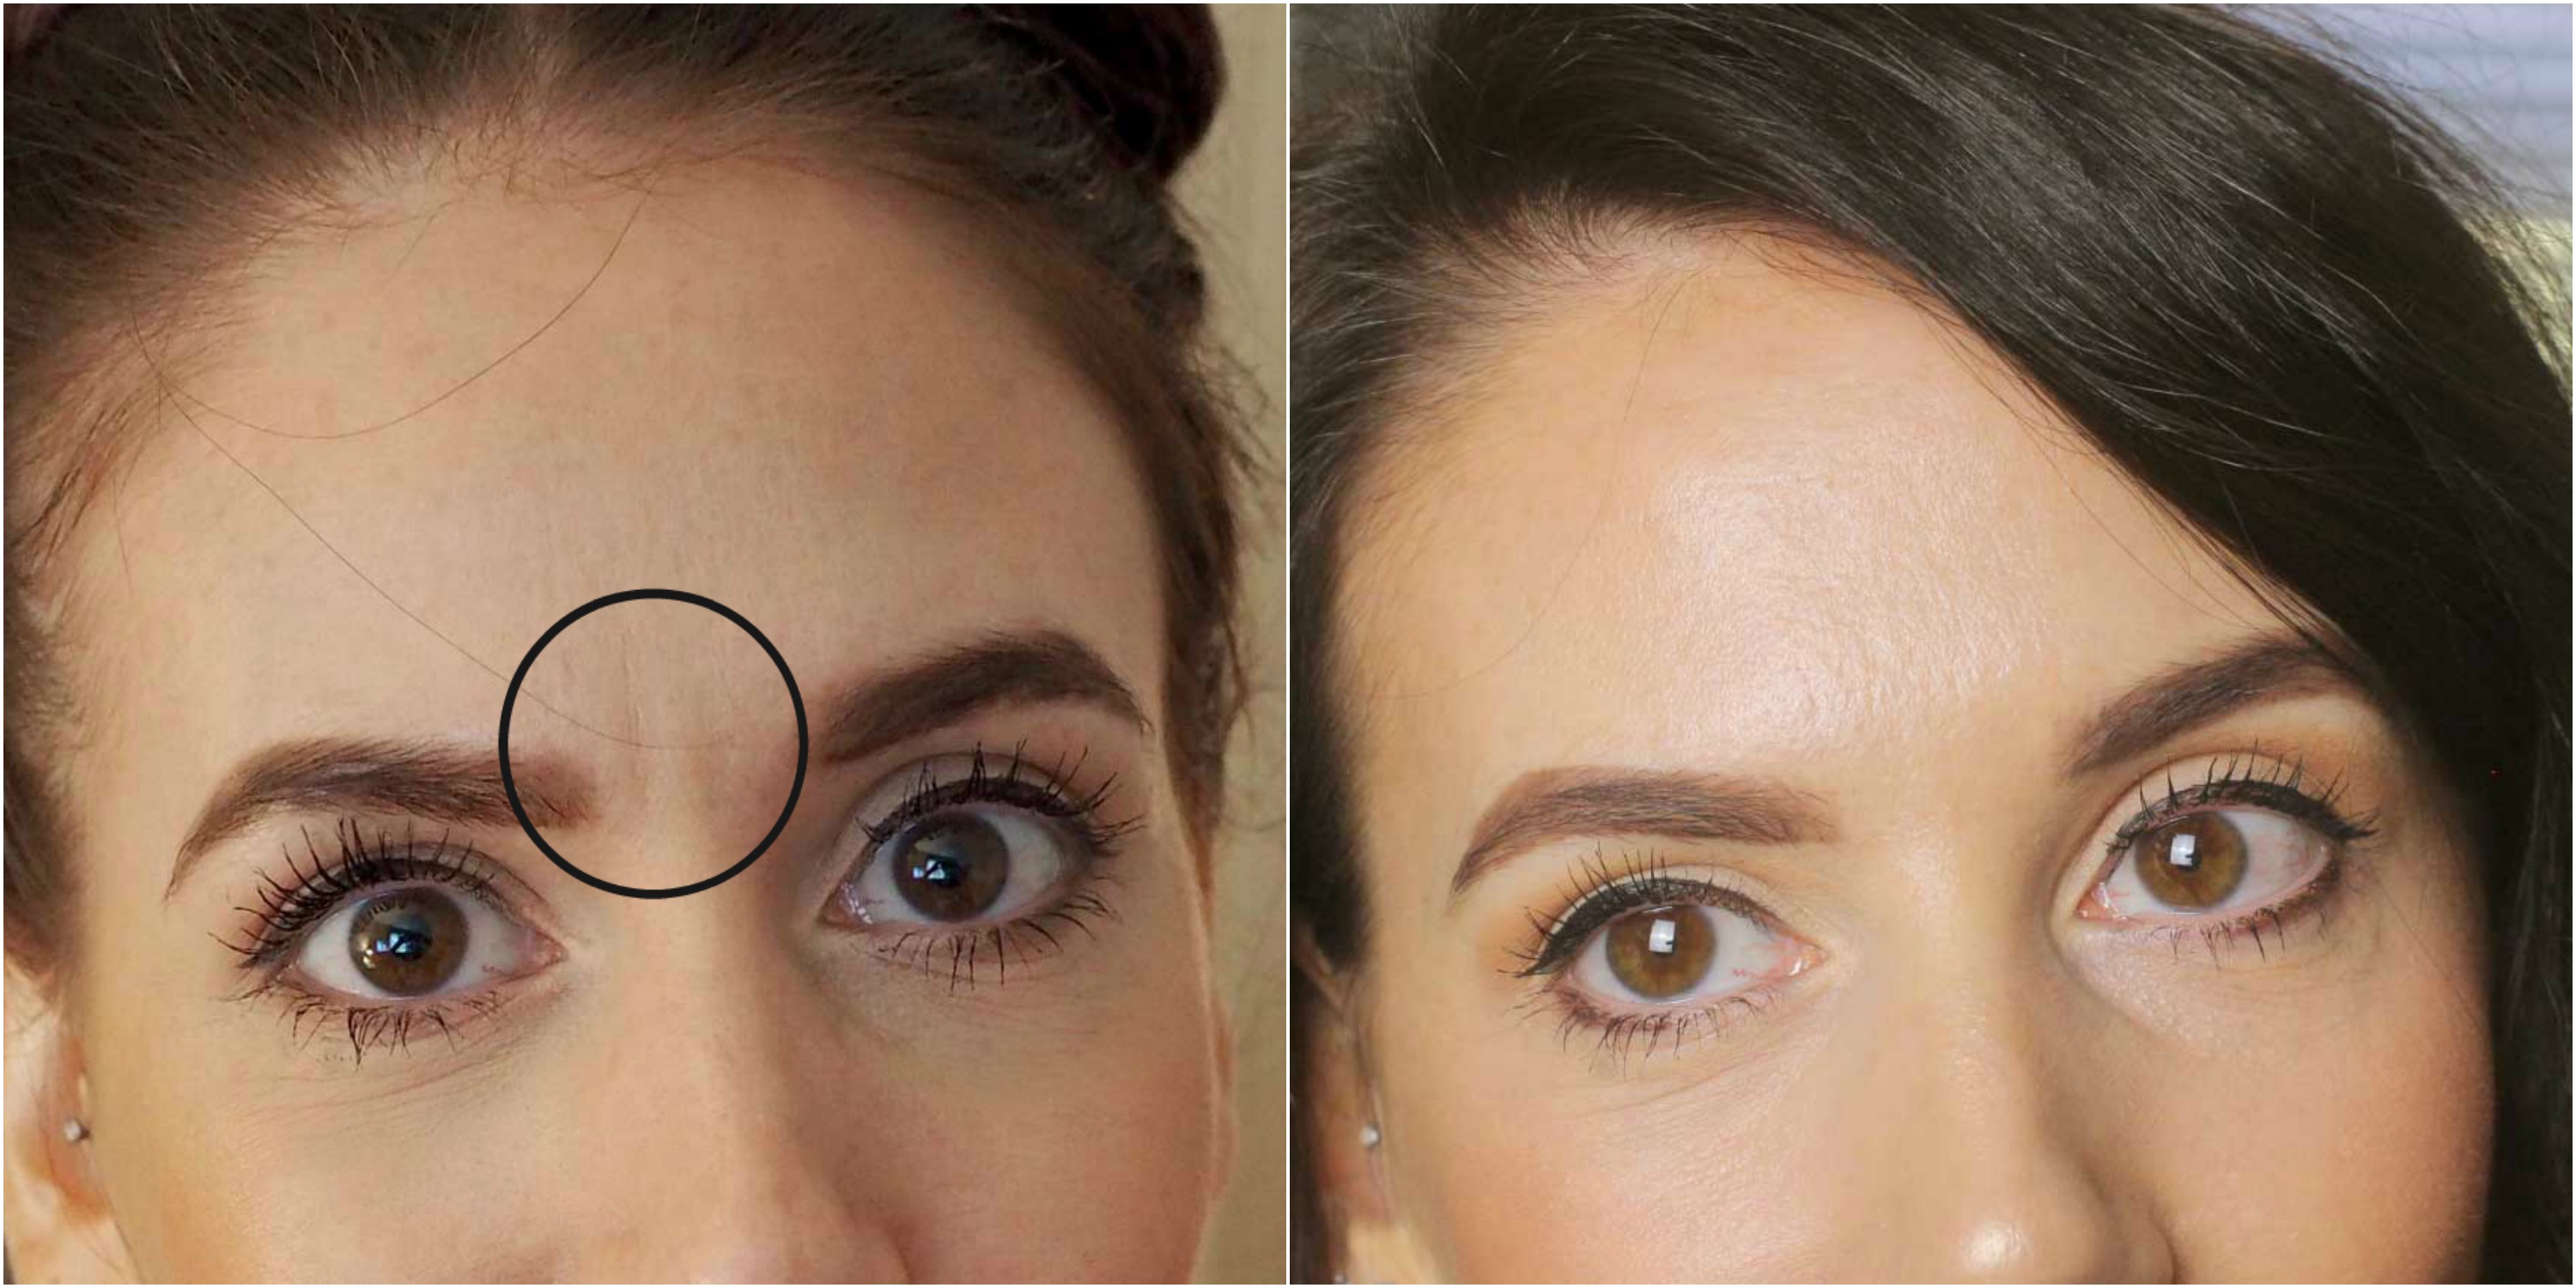 Botox for frown lines | before and after botox frown lines